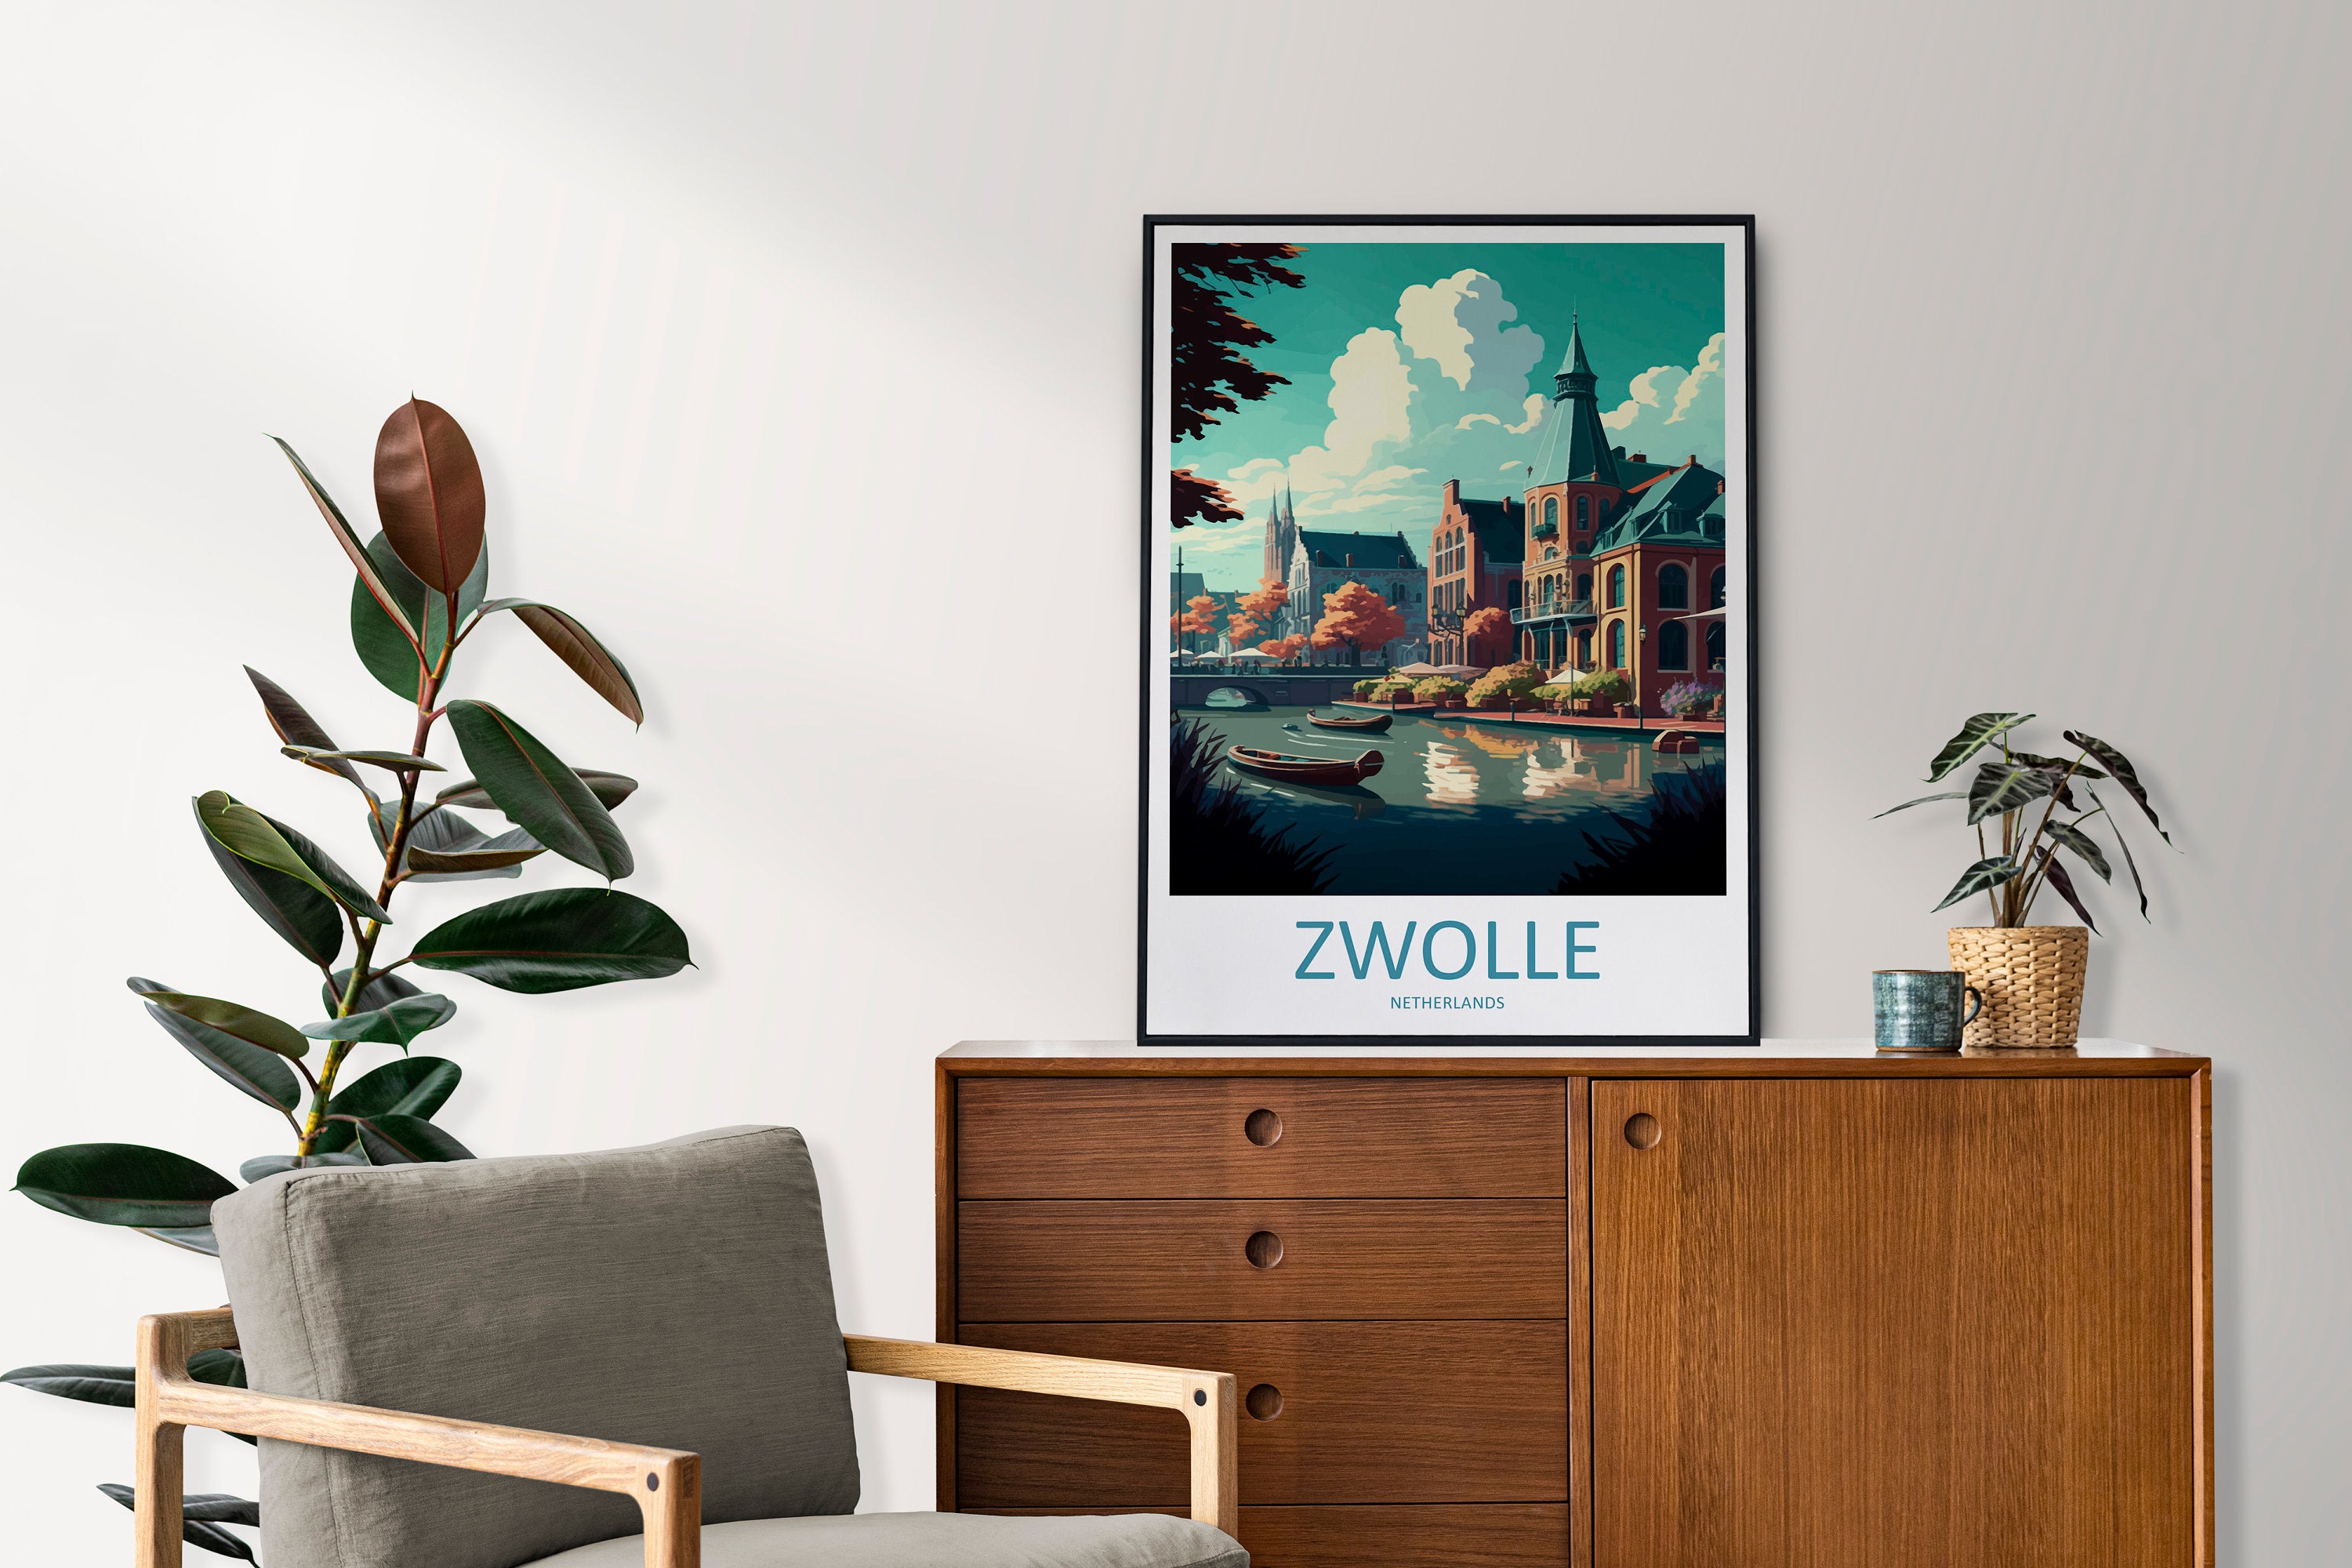 Zwolle Travel Print Wall Art Zwolle Wall Hanging Home Décor Zwolle Gift Art Lovers Netherlands Art Lover Gift Zwolle Travel Art